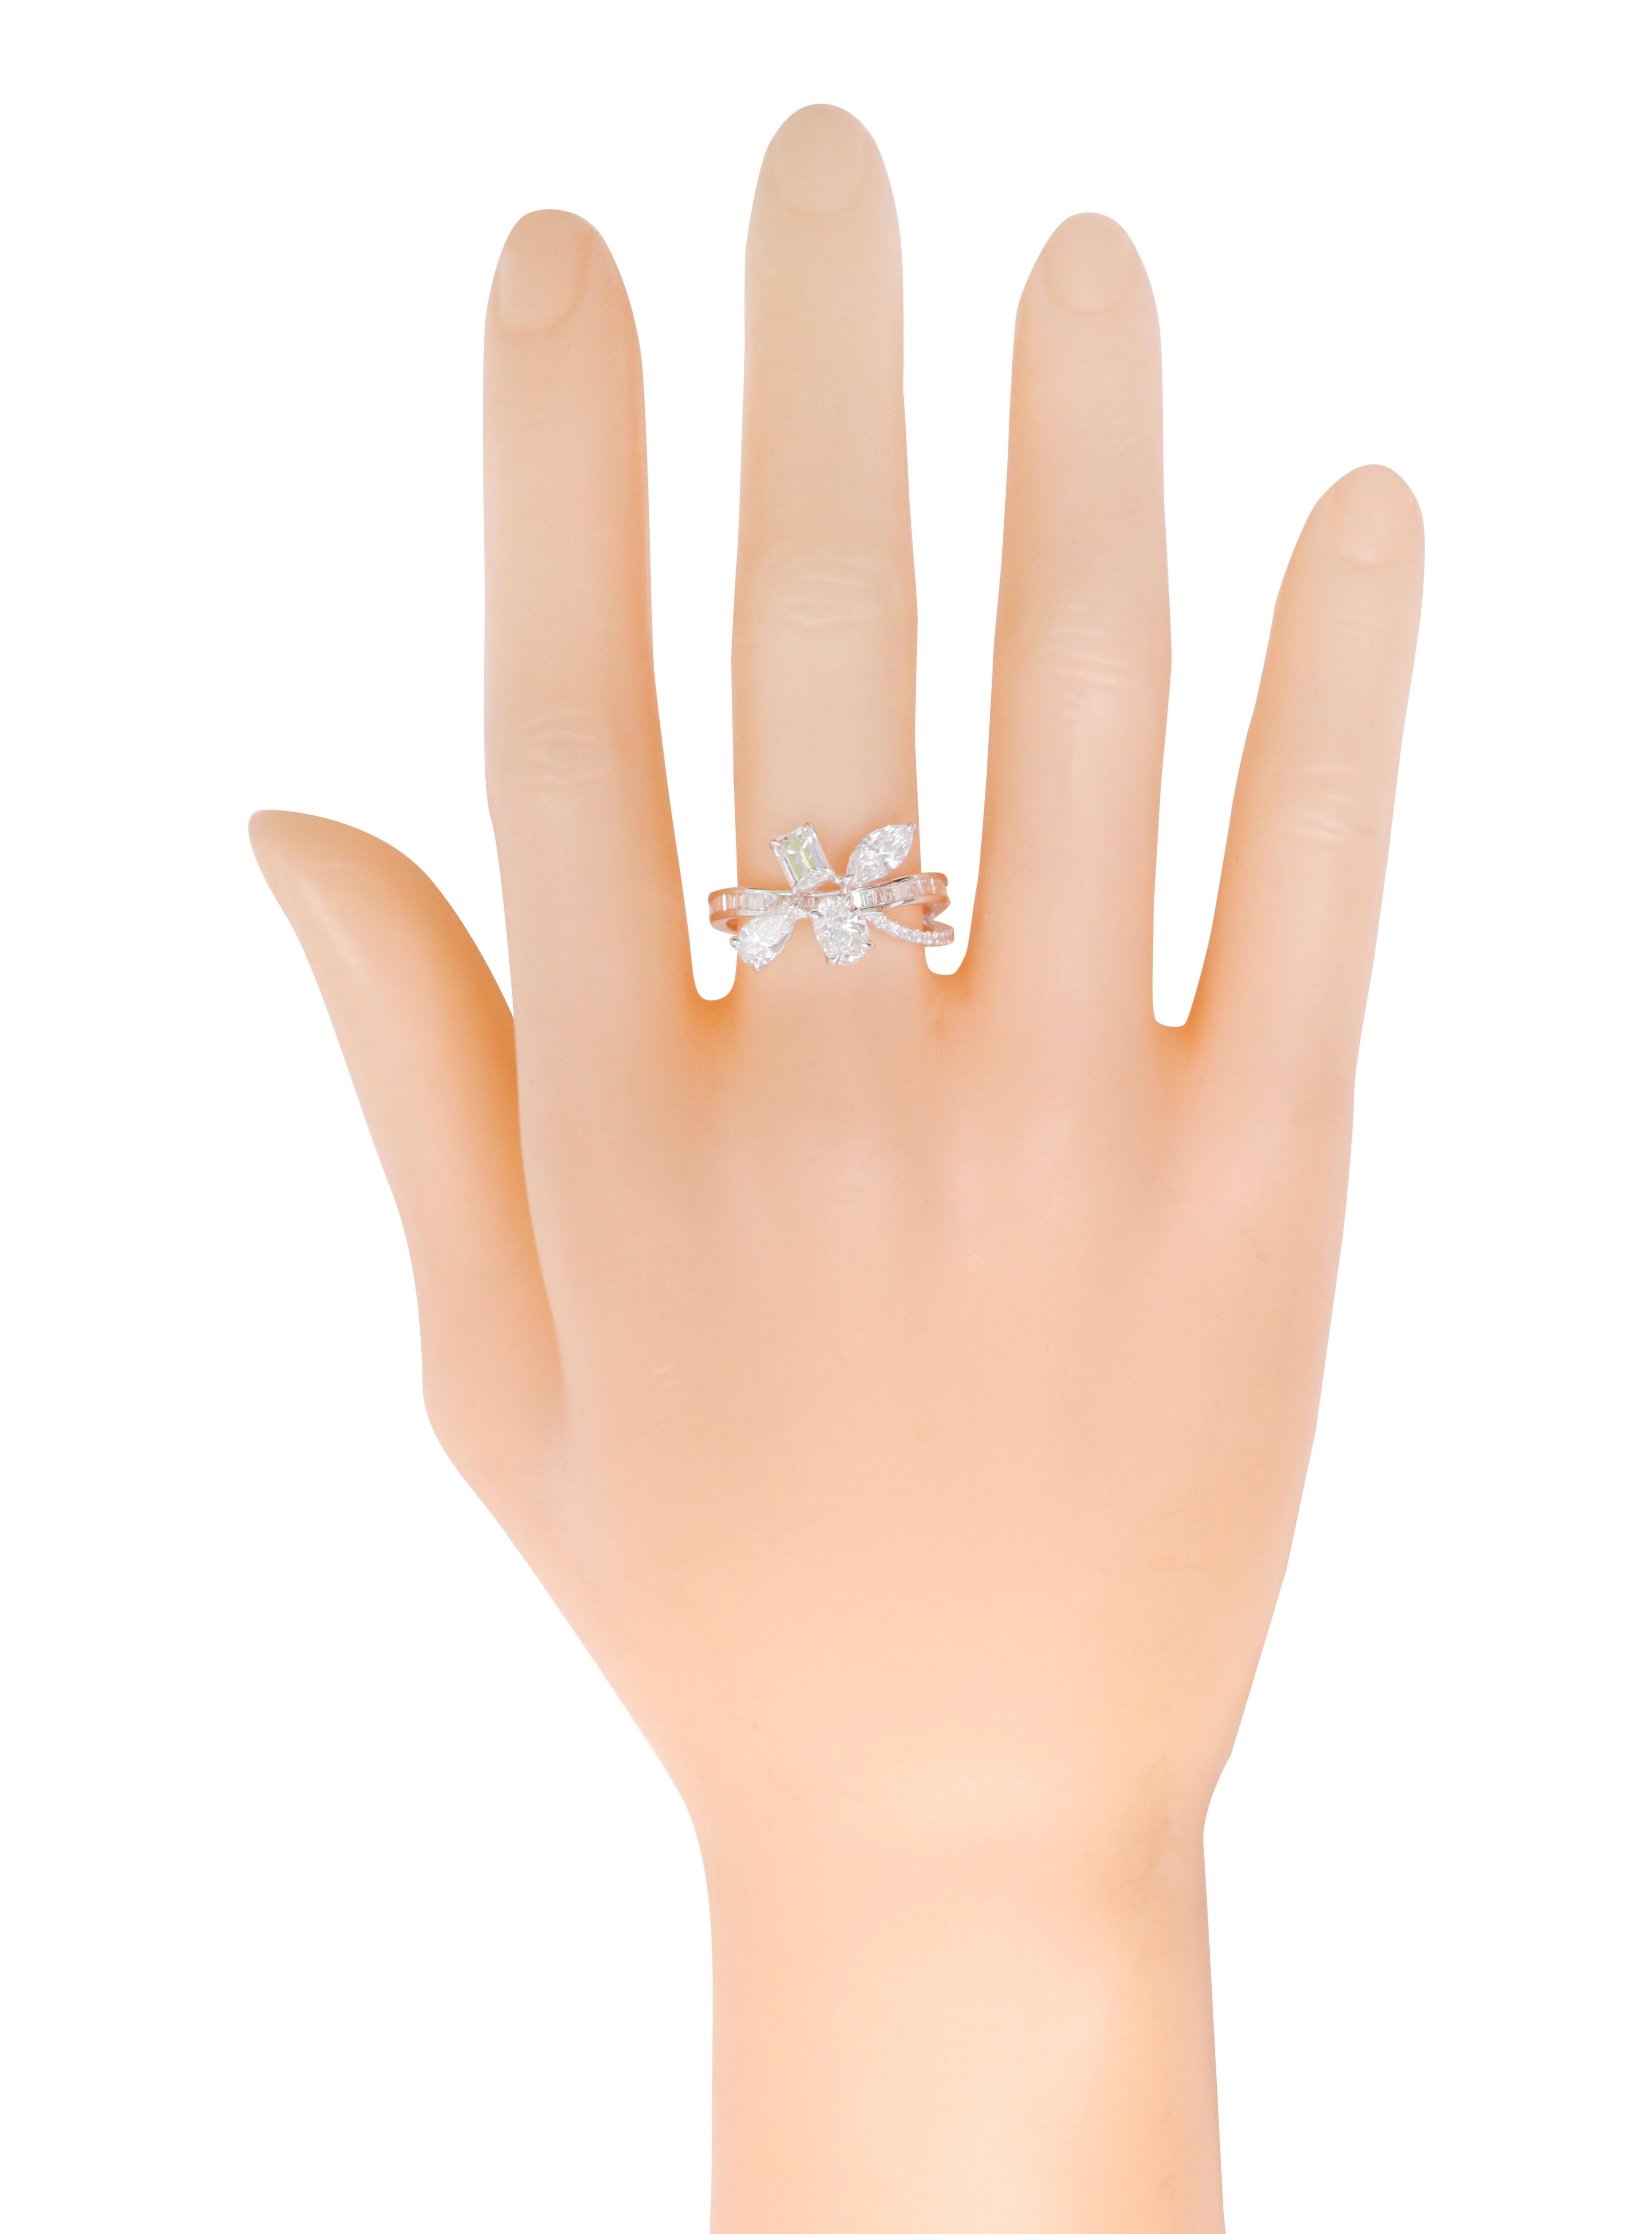 18 Karat White Gold 2.03 Carat Solitaire Fancy Diamond Ring

Want to reflect your modern individuality with not-so-cliche designs? Then you have stepped on just the right doorstep. Combining beauty with craftsmanship, this ring is definitely going